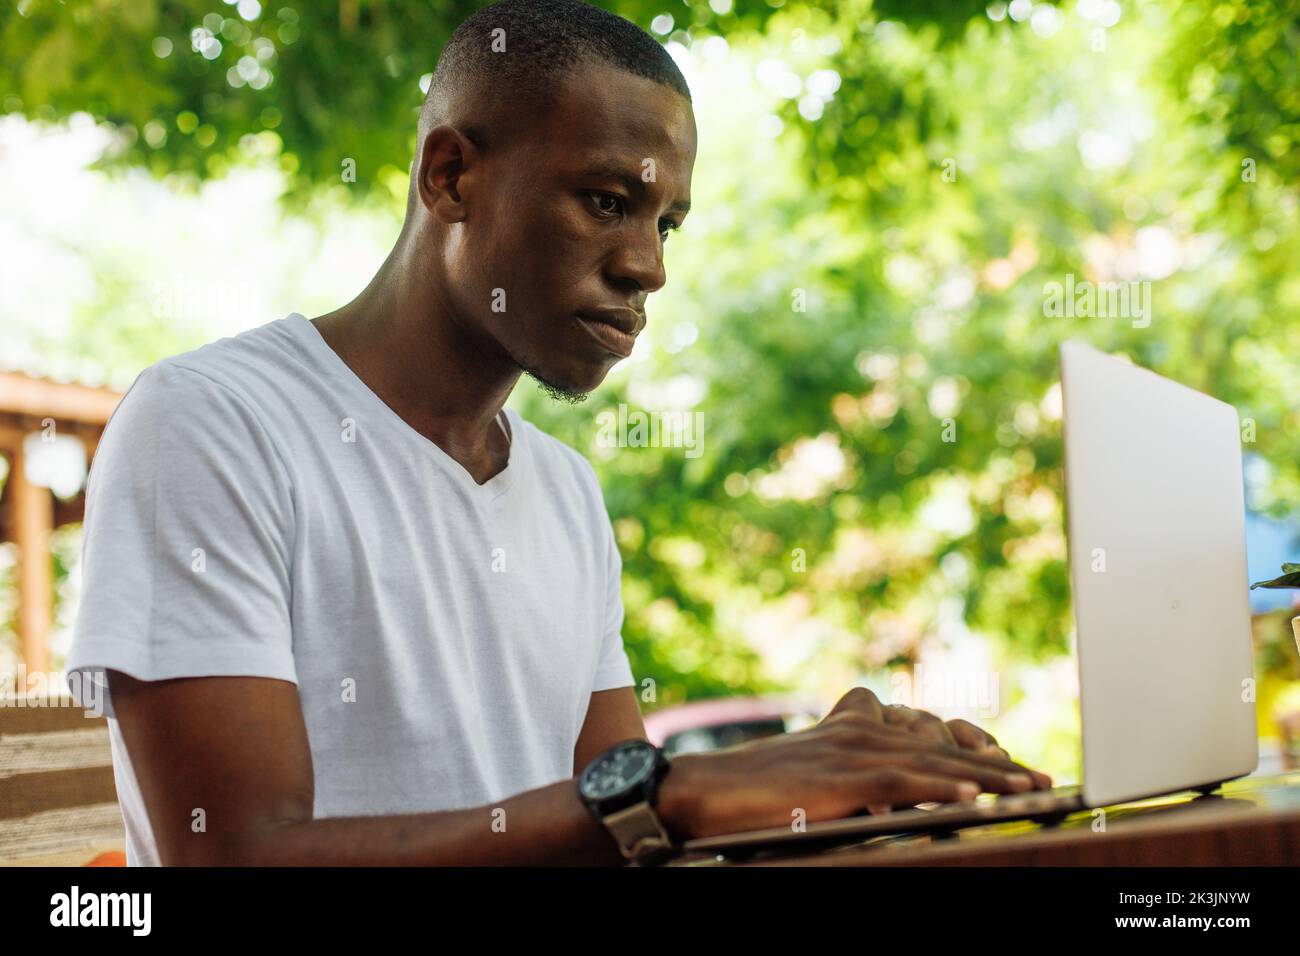 Confident, serious, calm multicultural man working online using laptop outdoors. E-learning, online internet education Stock Photo